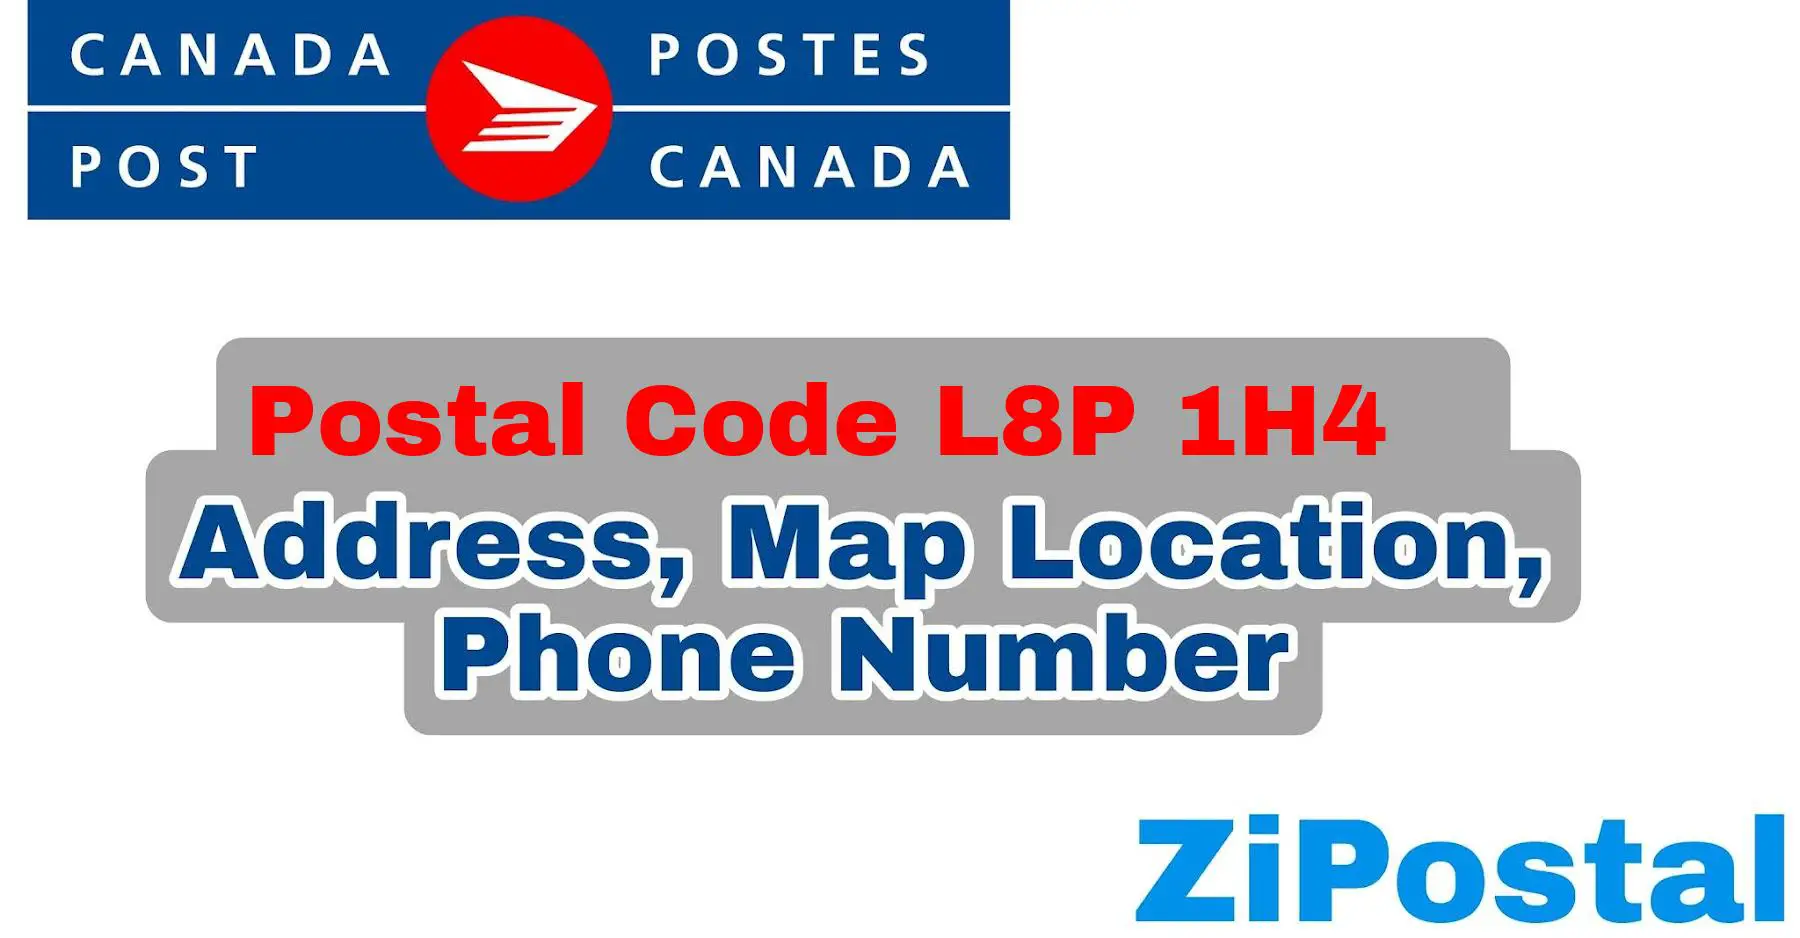 Postal Code L8P 1H4 Address Map Location and Phone Number